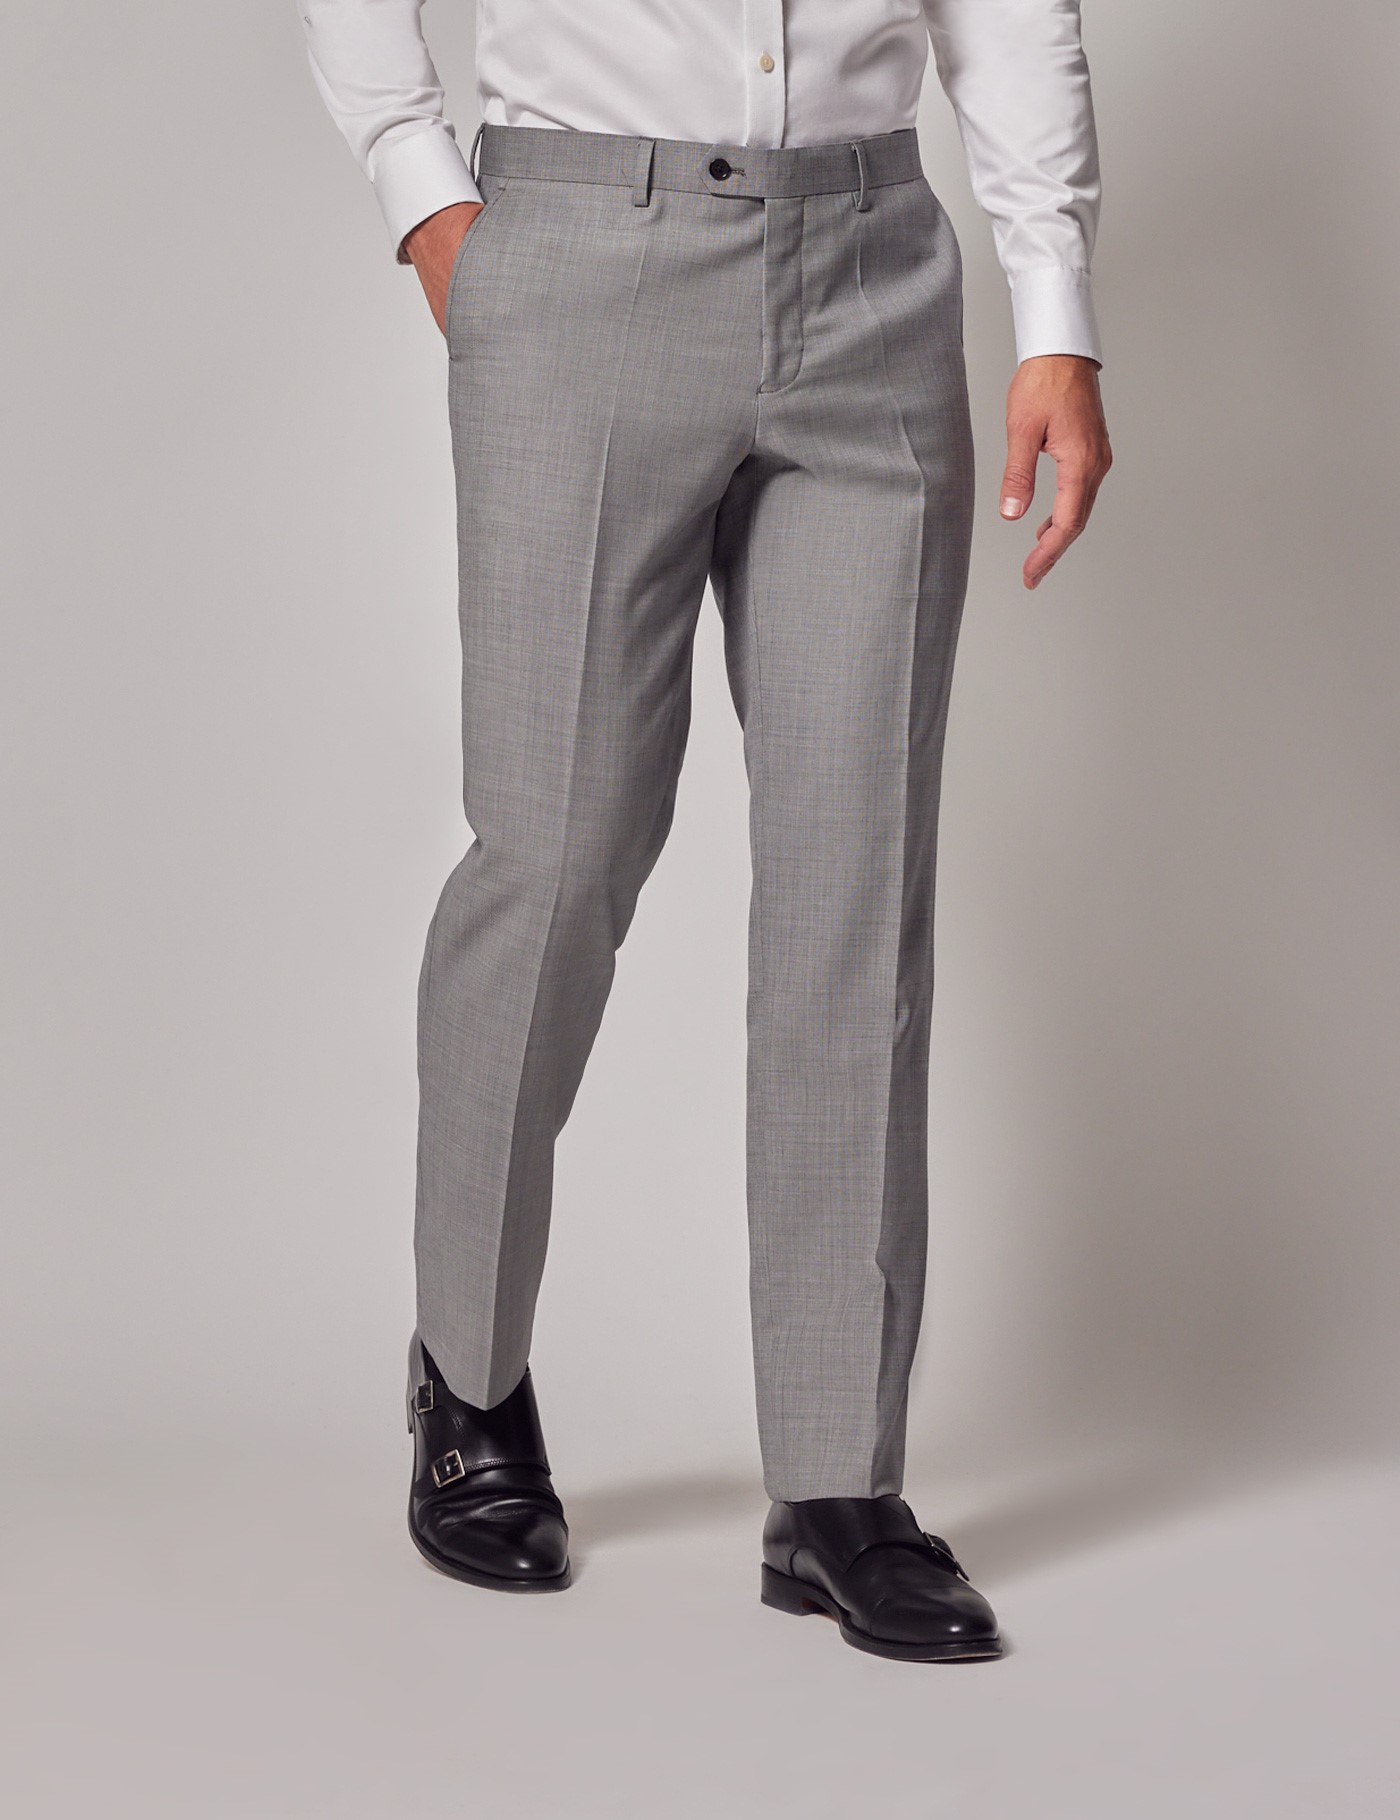 Buy the best Grey cotton pants for men in India | The men's kompany World